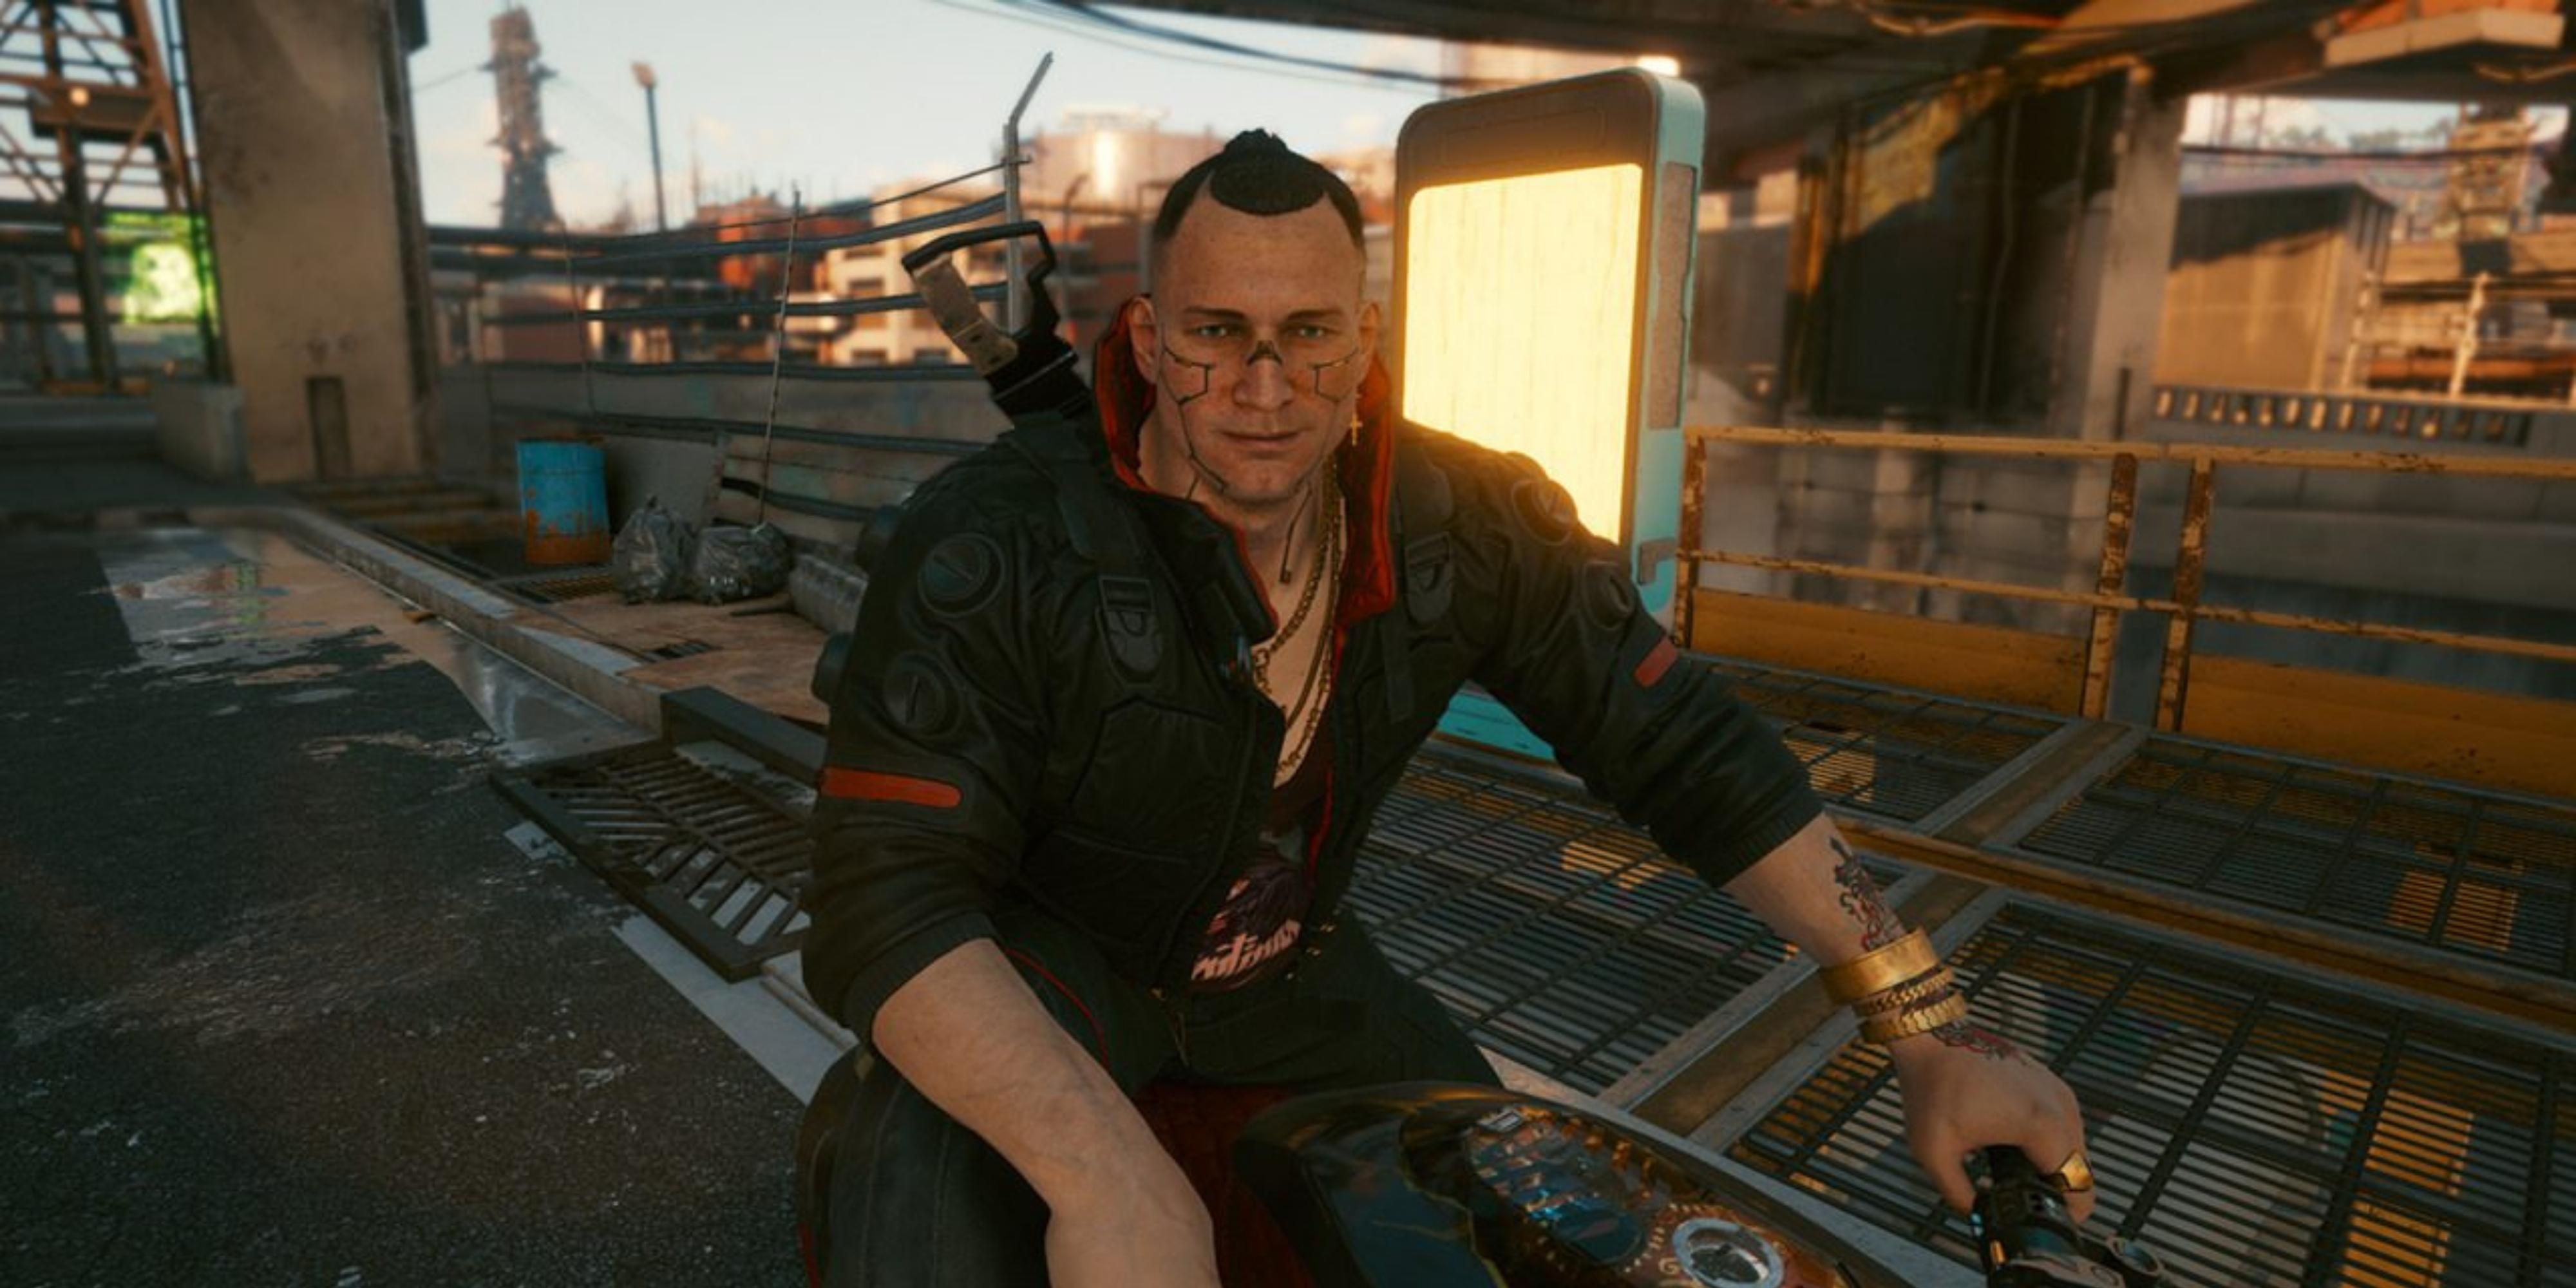 ackie on his motorbike in Cyberpunk 2077 by CD Projekt Red